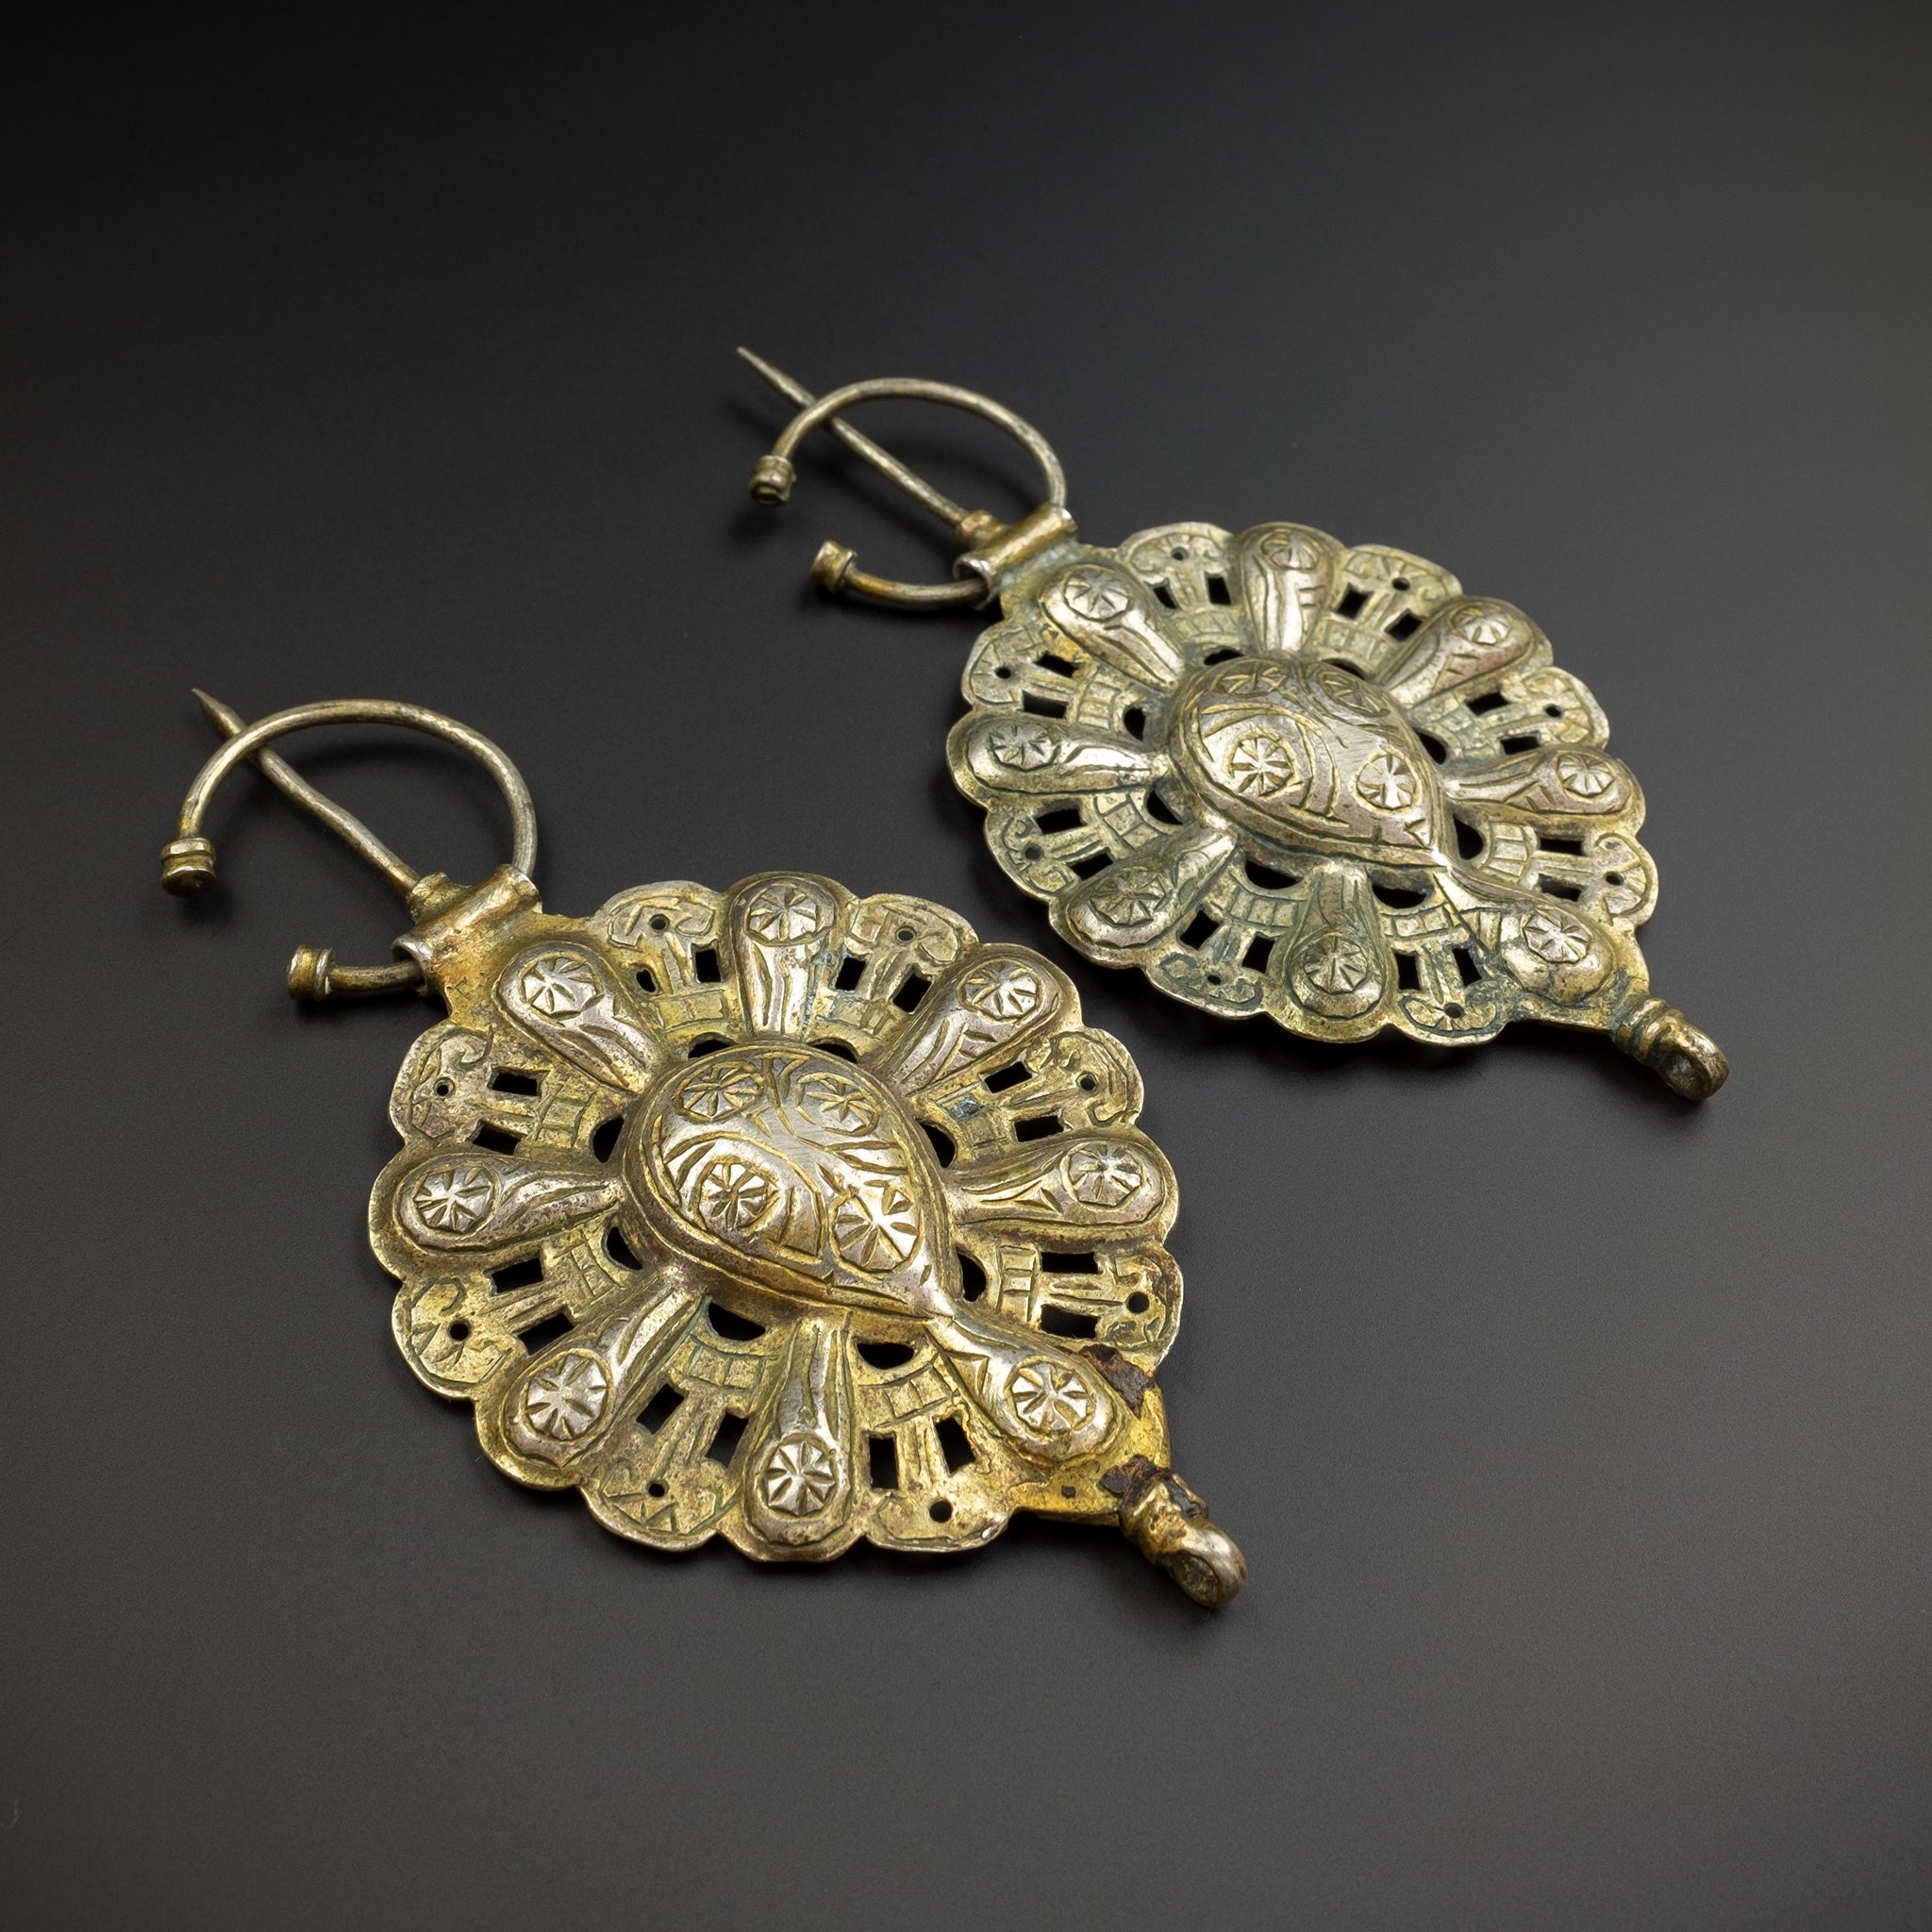 Vintage Pair of Silver Fibulae from Ouezzane, Morocco